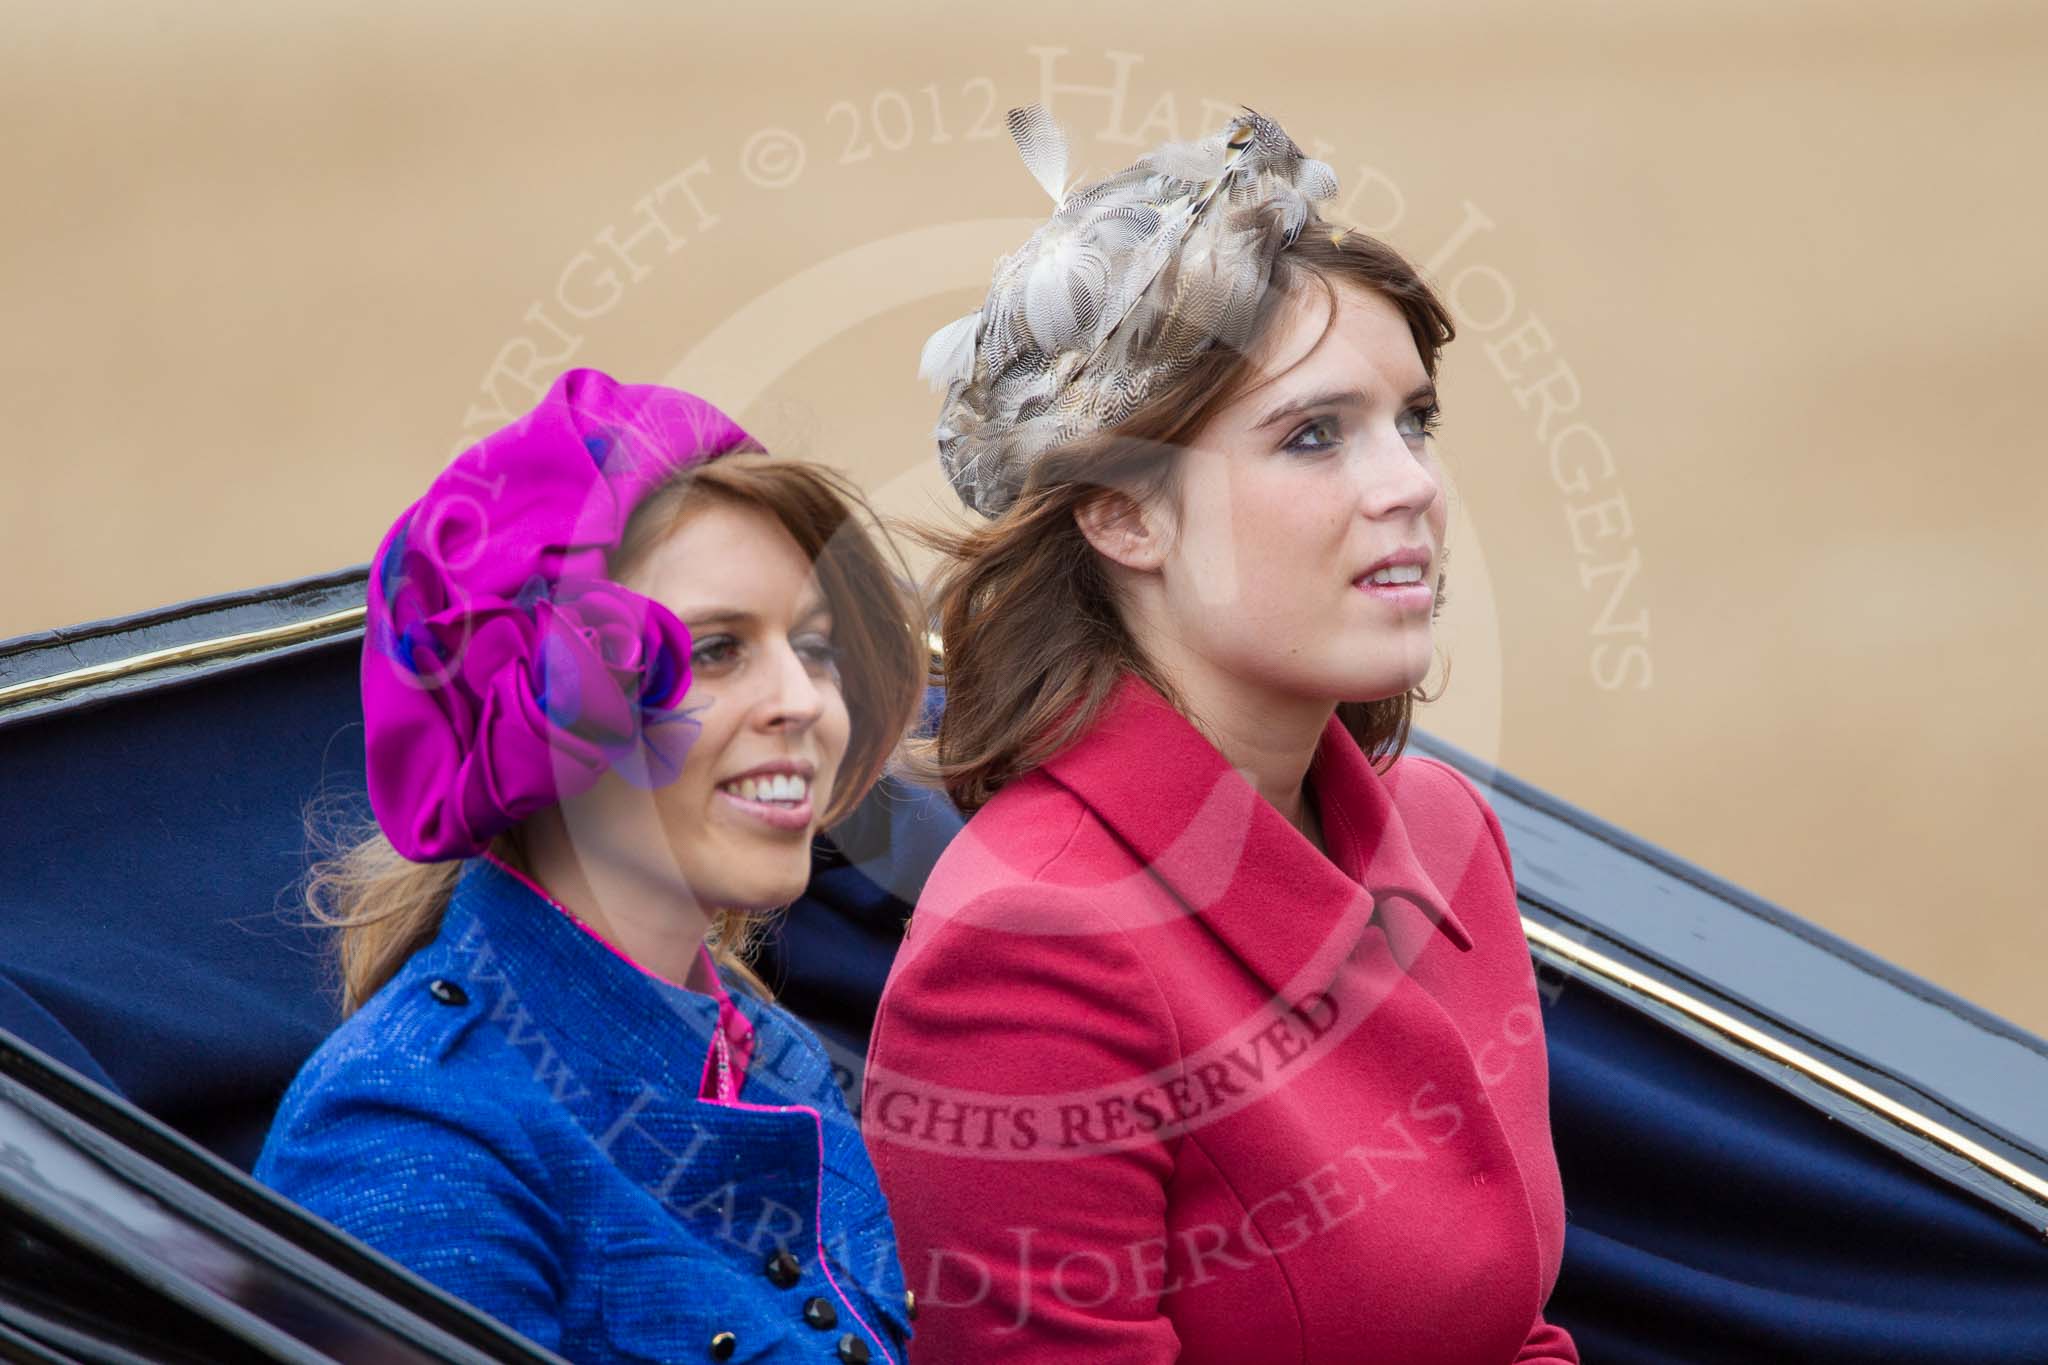 Trooping the Colour 2012: Princesses Beatrice and Eugenie of York in the second carriage..
Horse Guards Parade, Westminster,
London SW1,

United Kingdom,
on 16 June 2012 at 10:51, image #130